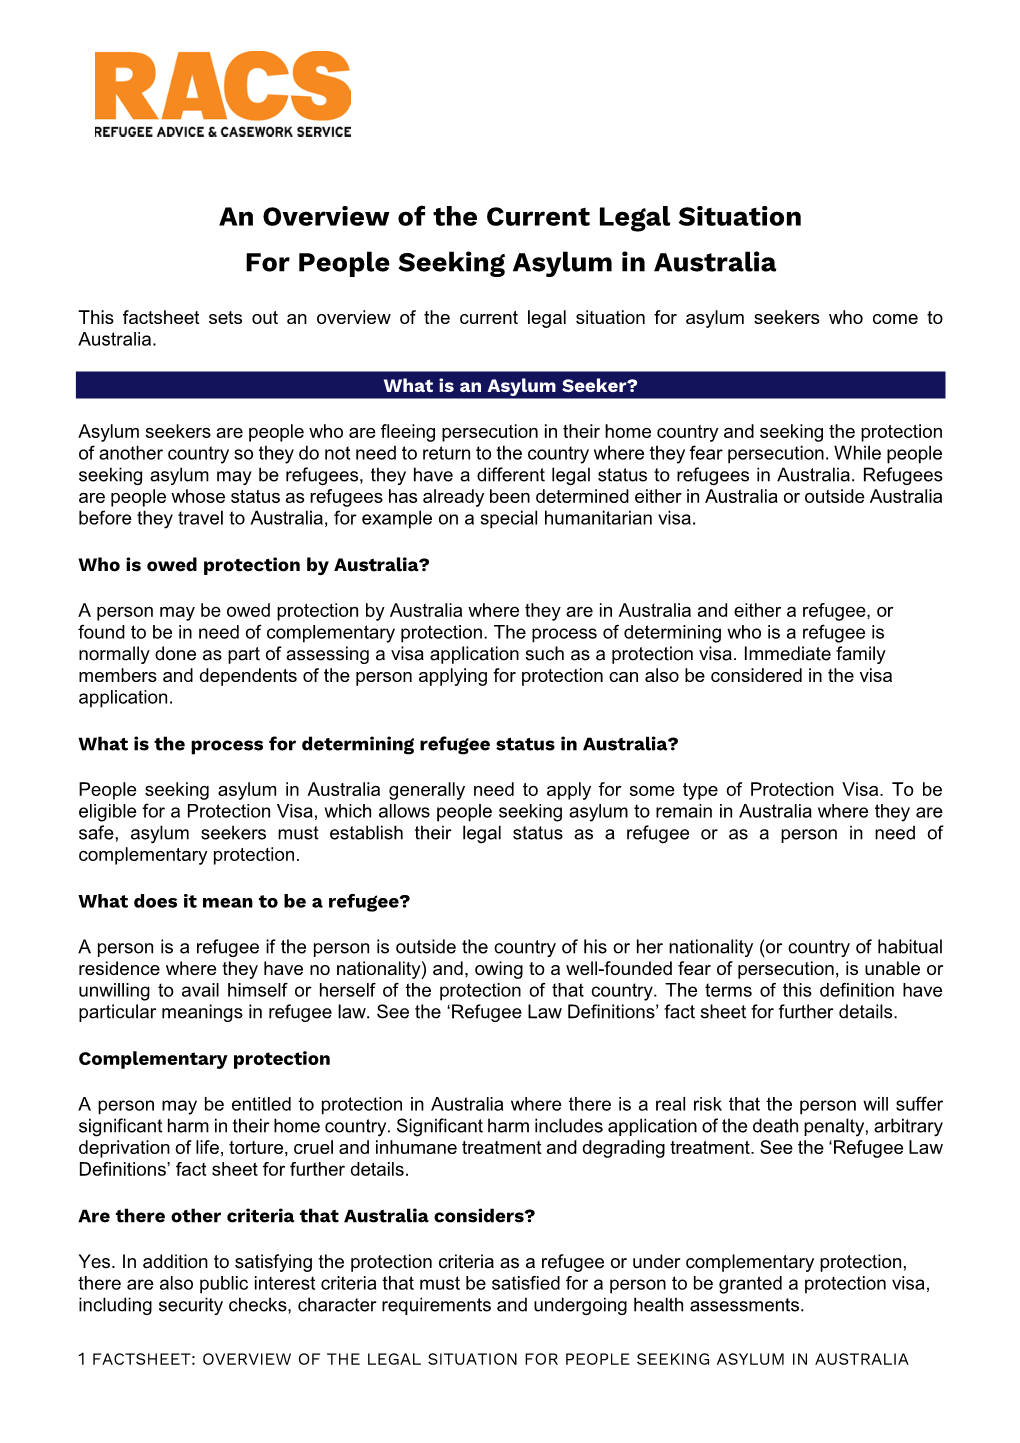 An Overview of the Current Legal Situation for People Seeking Asylum in Australia